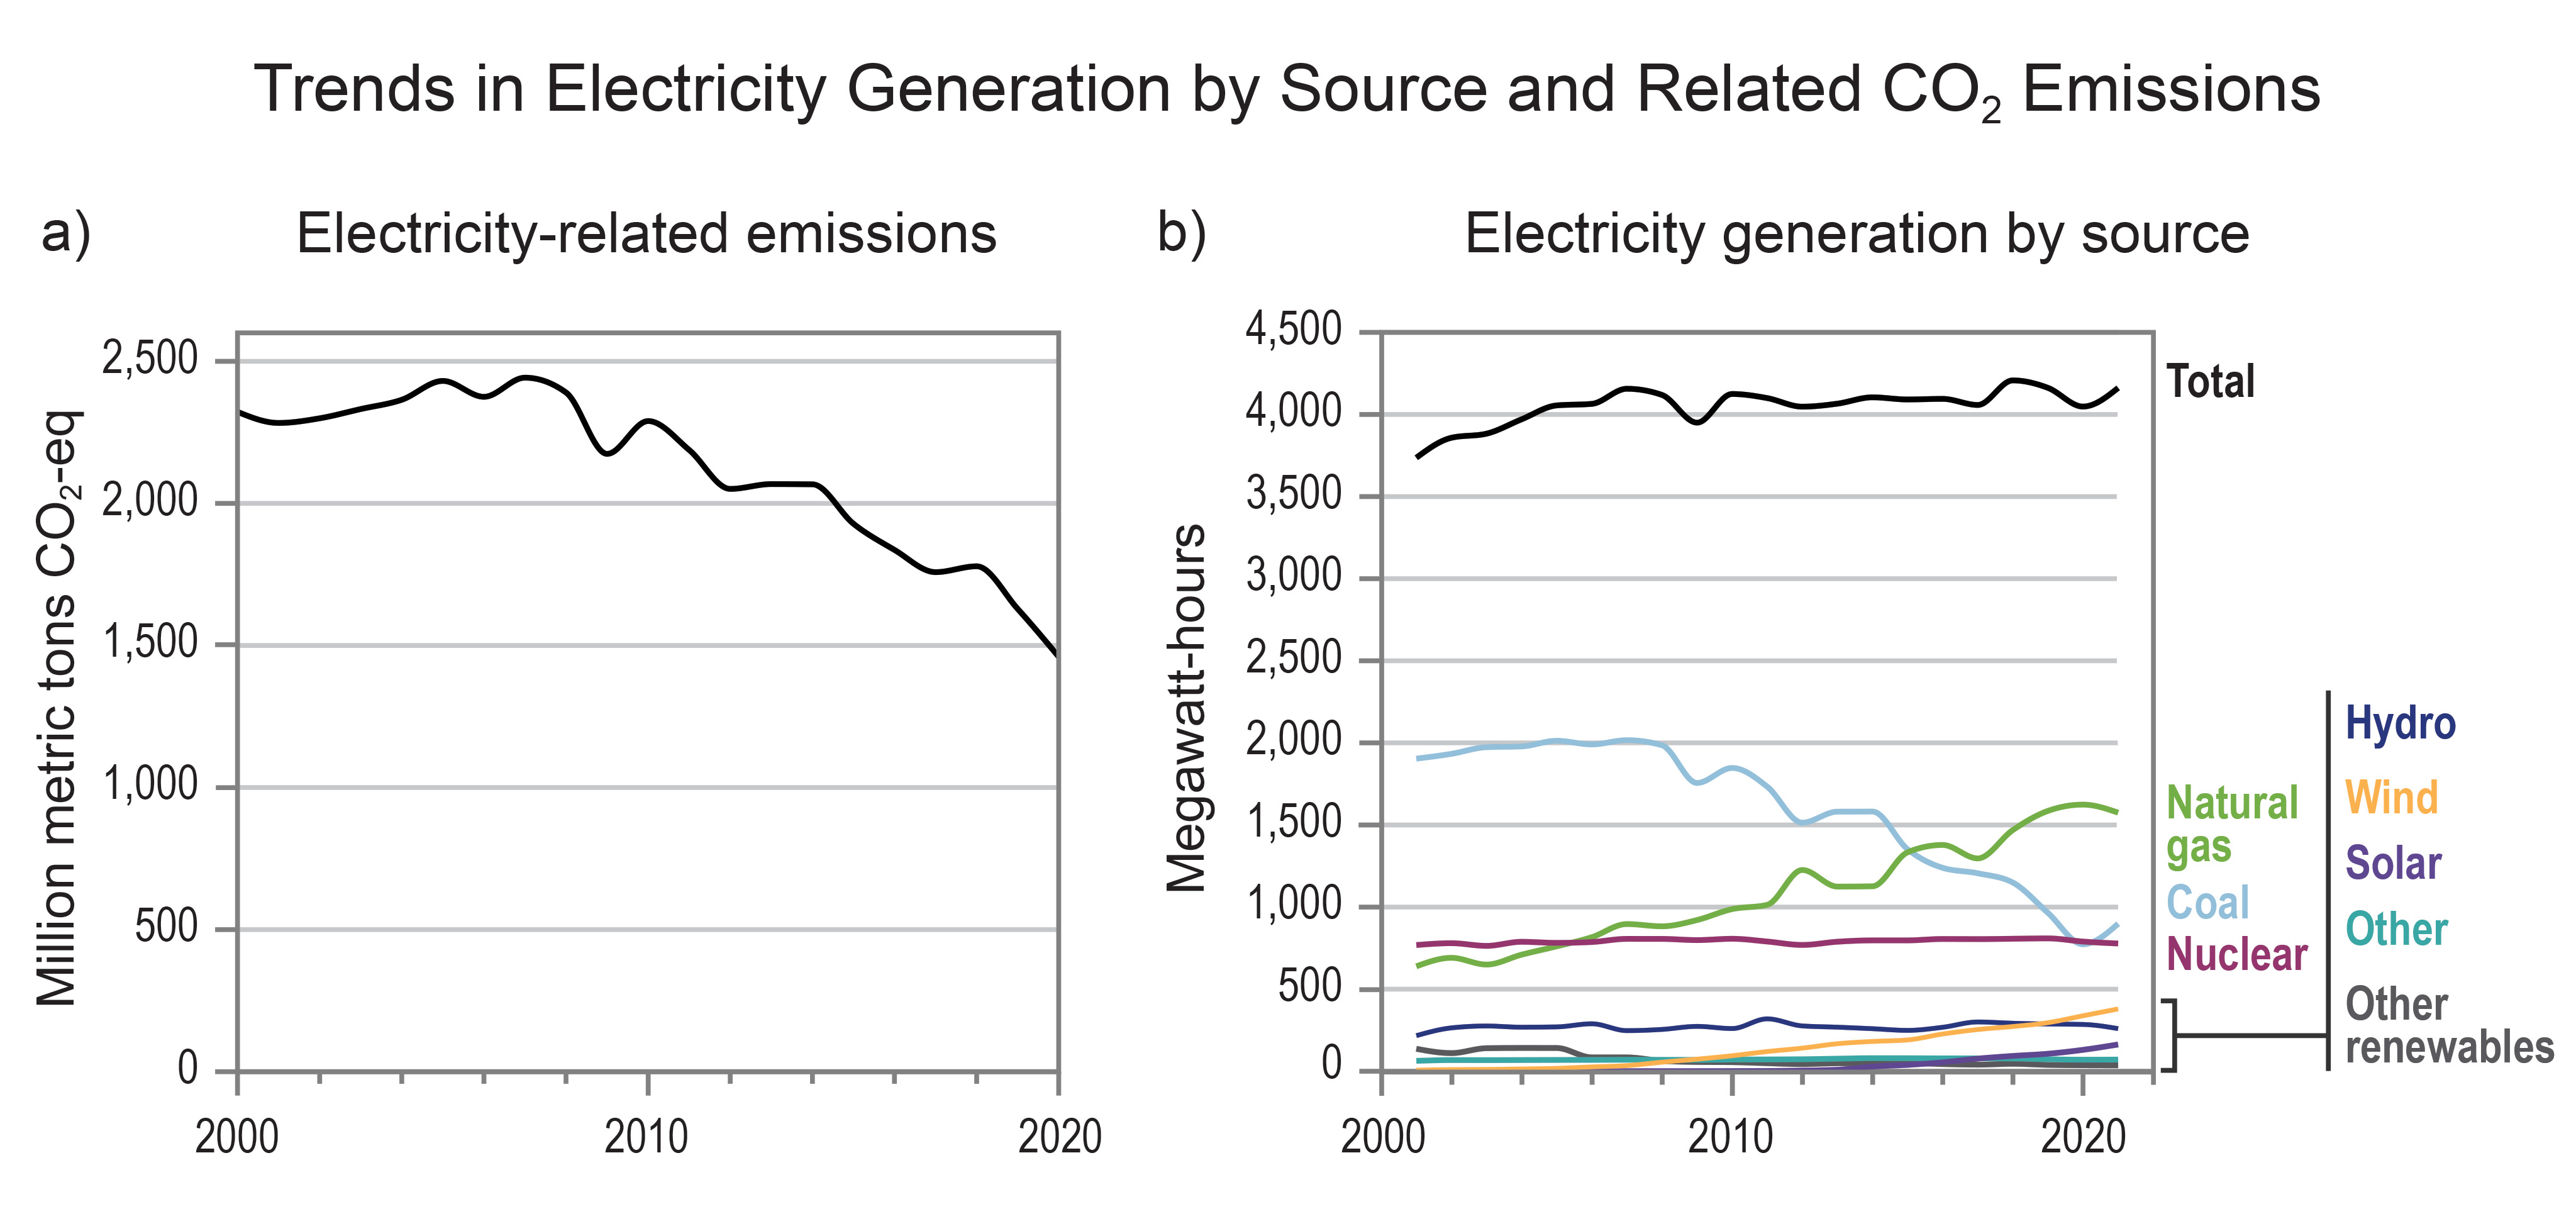 Trends in Electricity Generation by Source and Related CO<sub>2</sub> Emissions